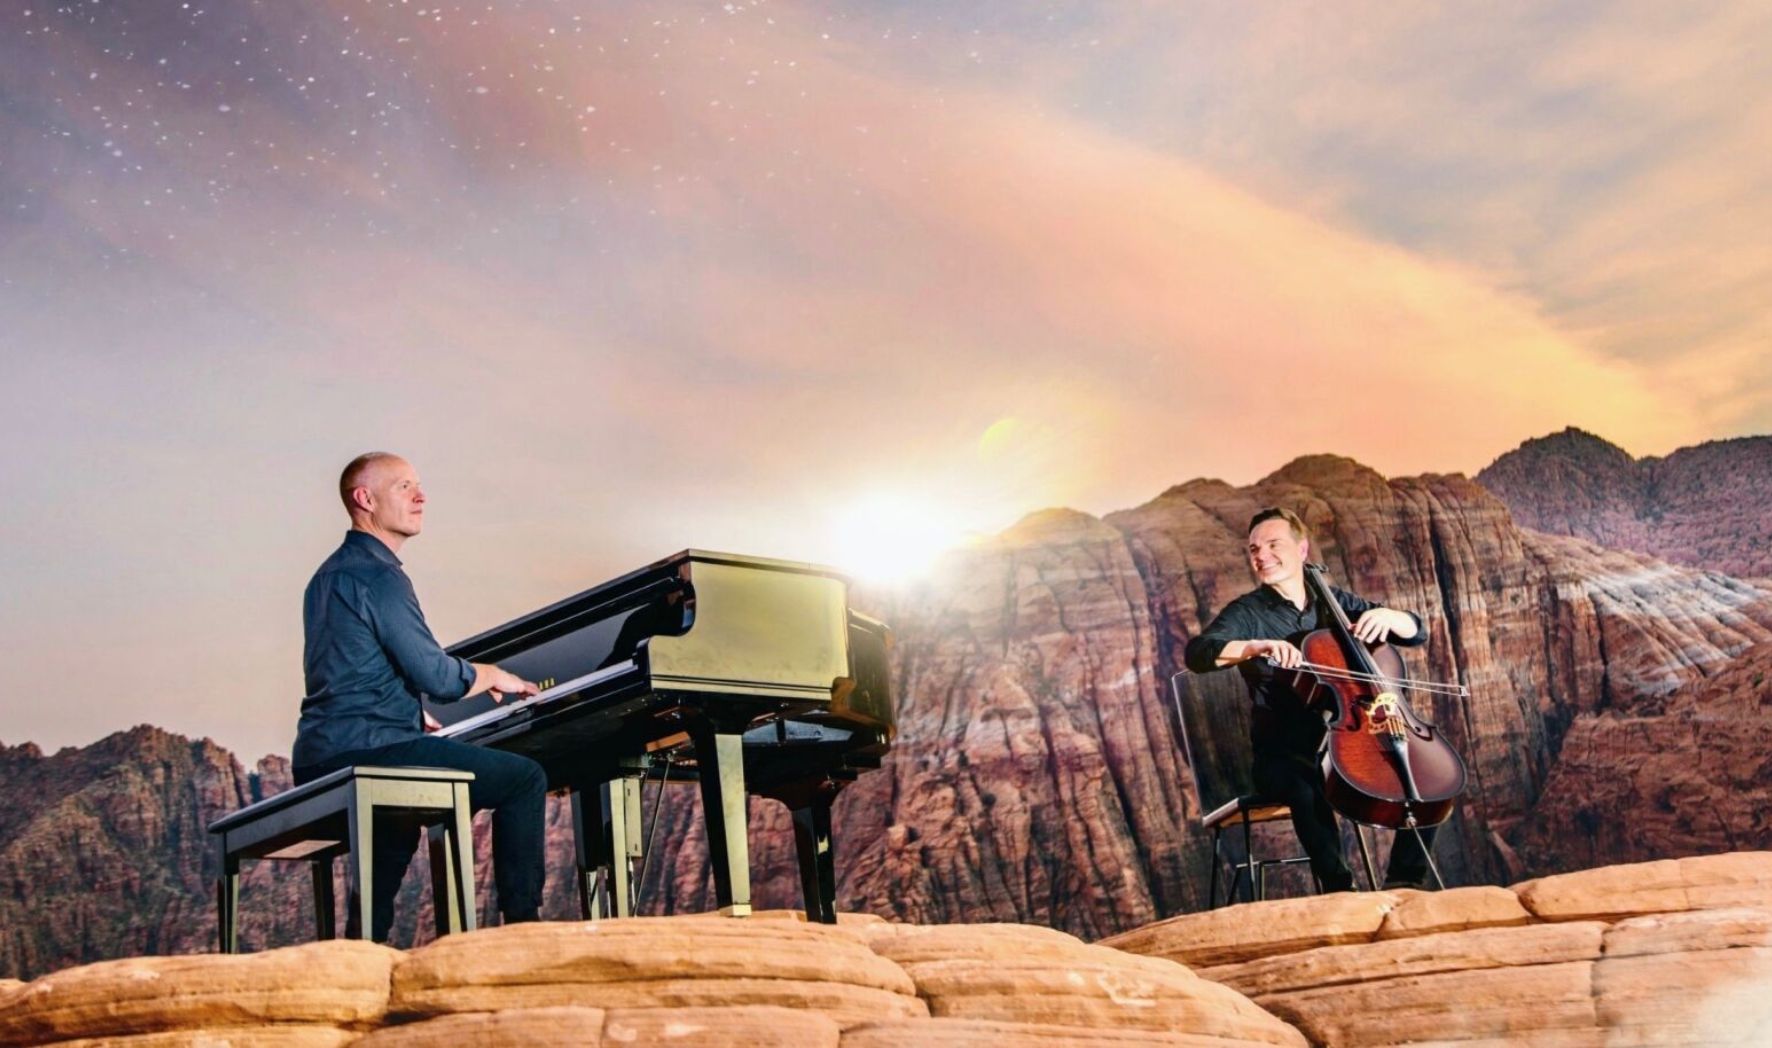 More Info for The Piano Guys